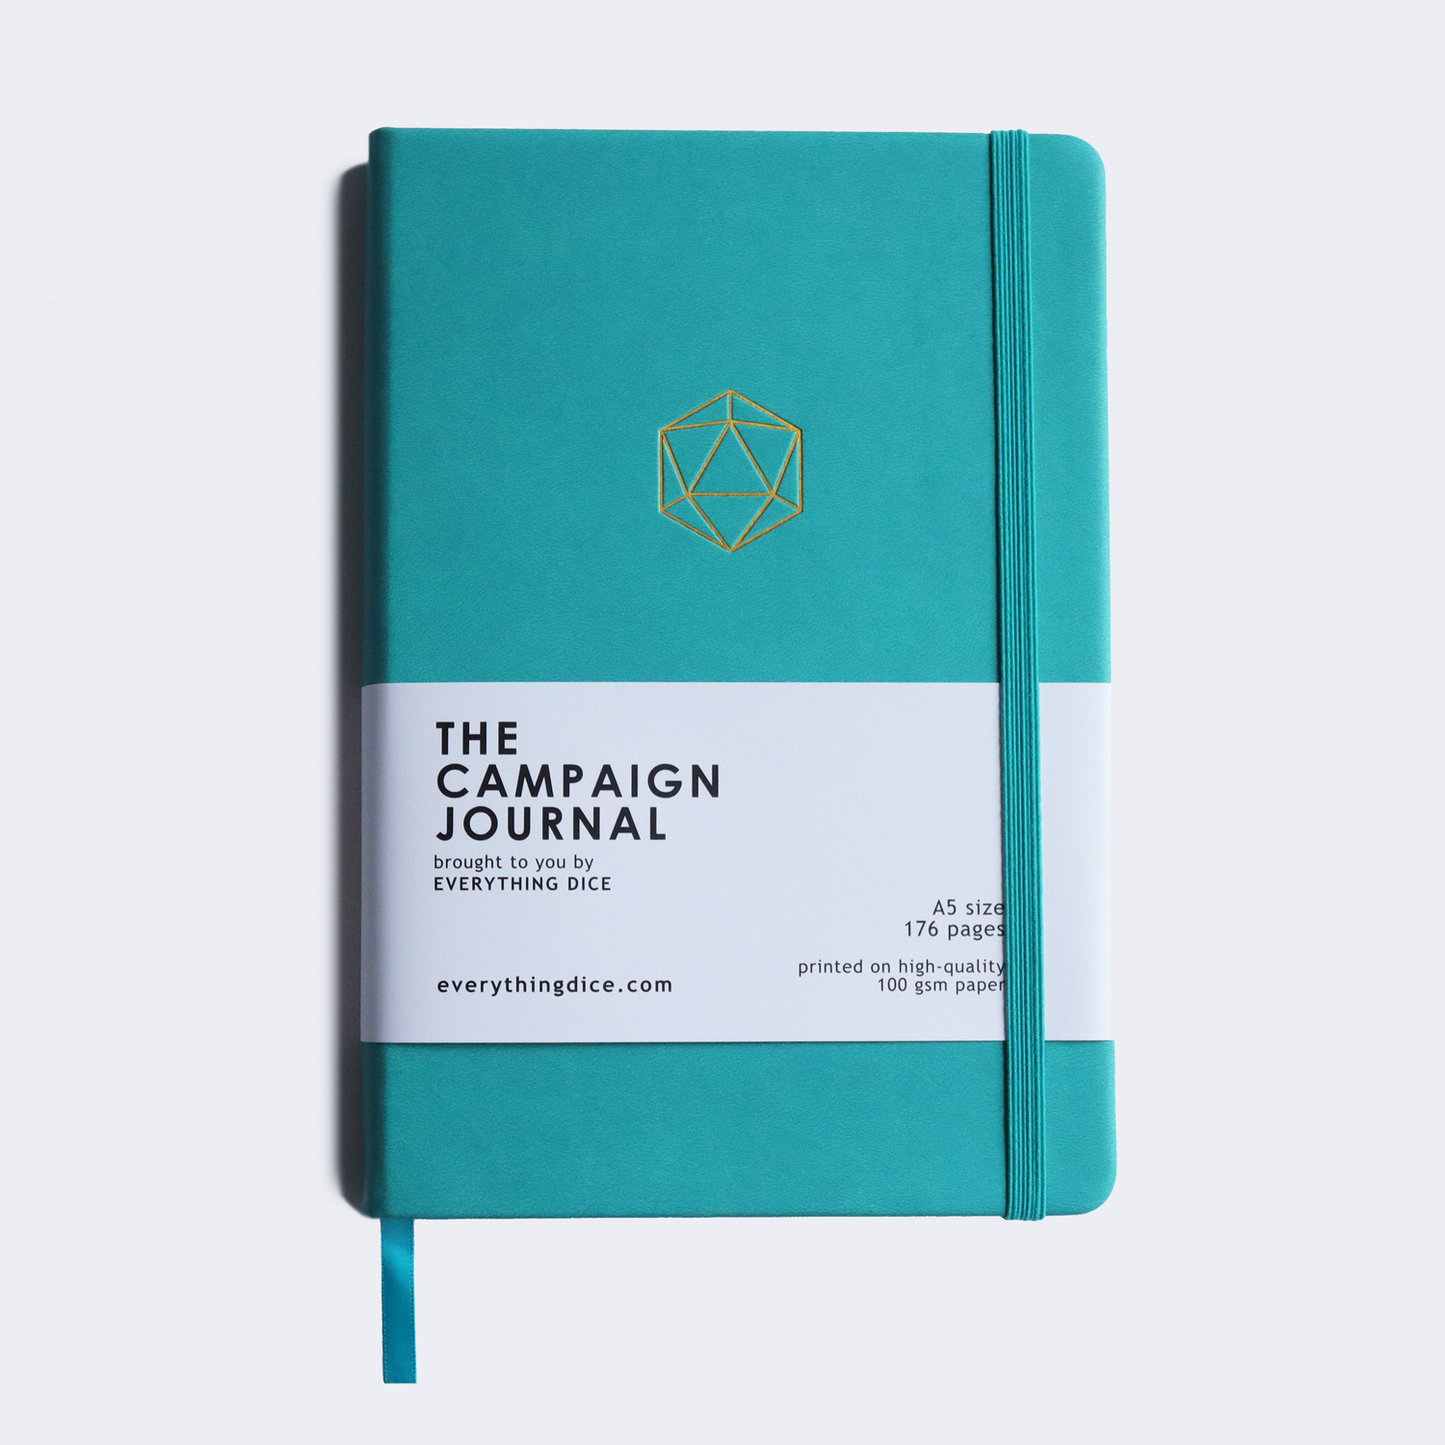 NEW COLORS! The Campaign Journal for DnD 5e - A5 Hardcover Notebook